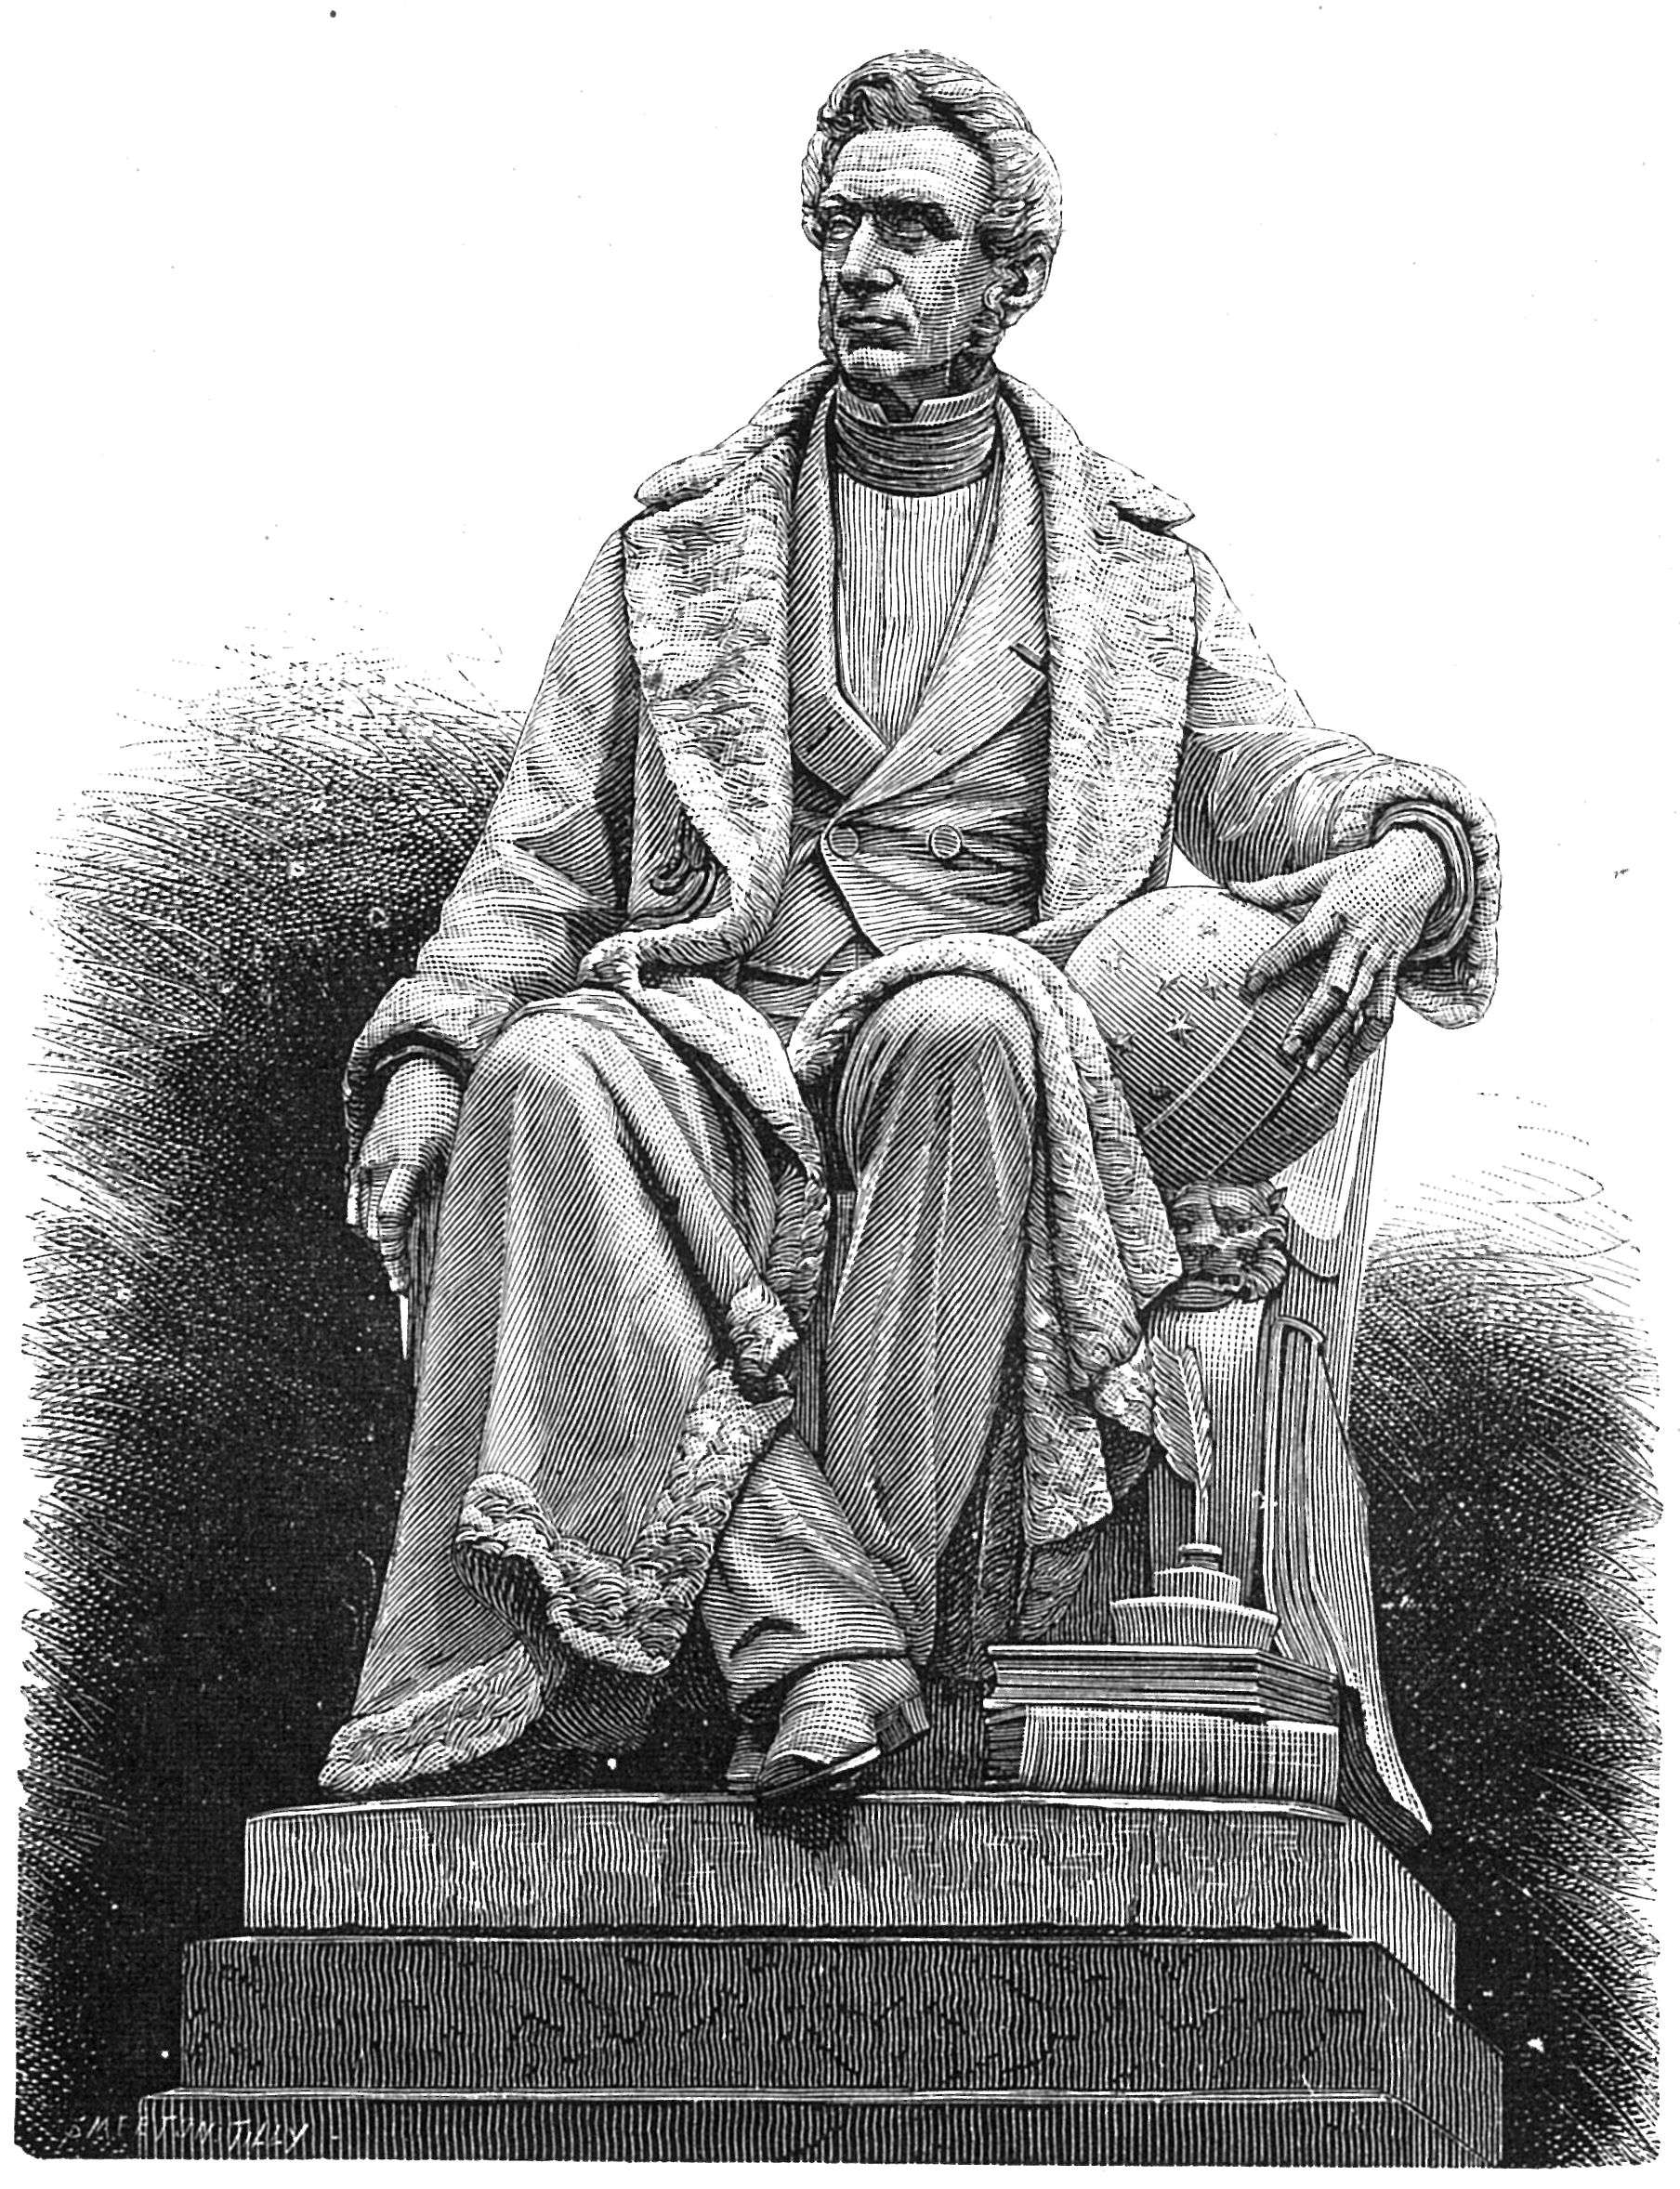 Statue of Adolphe Quetelet